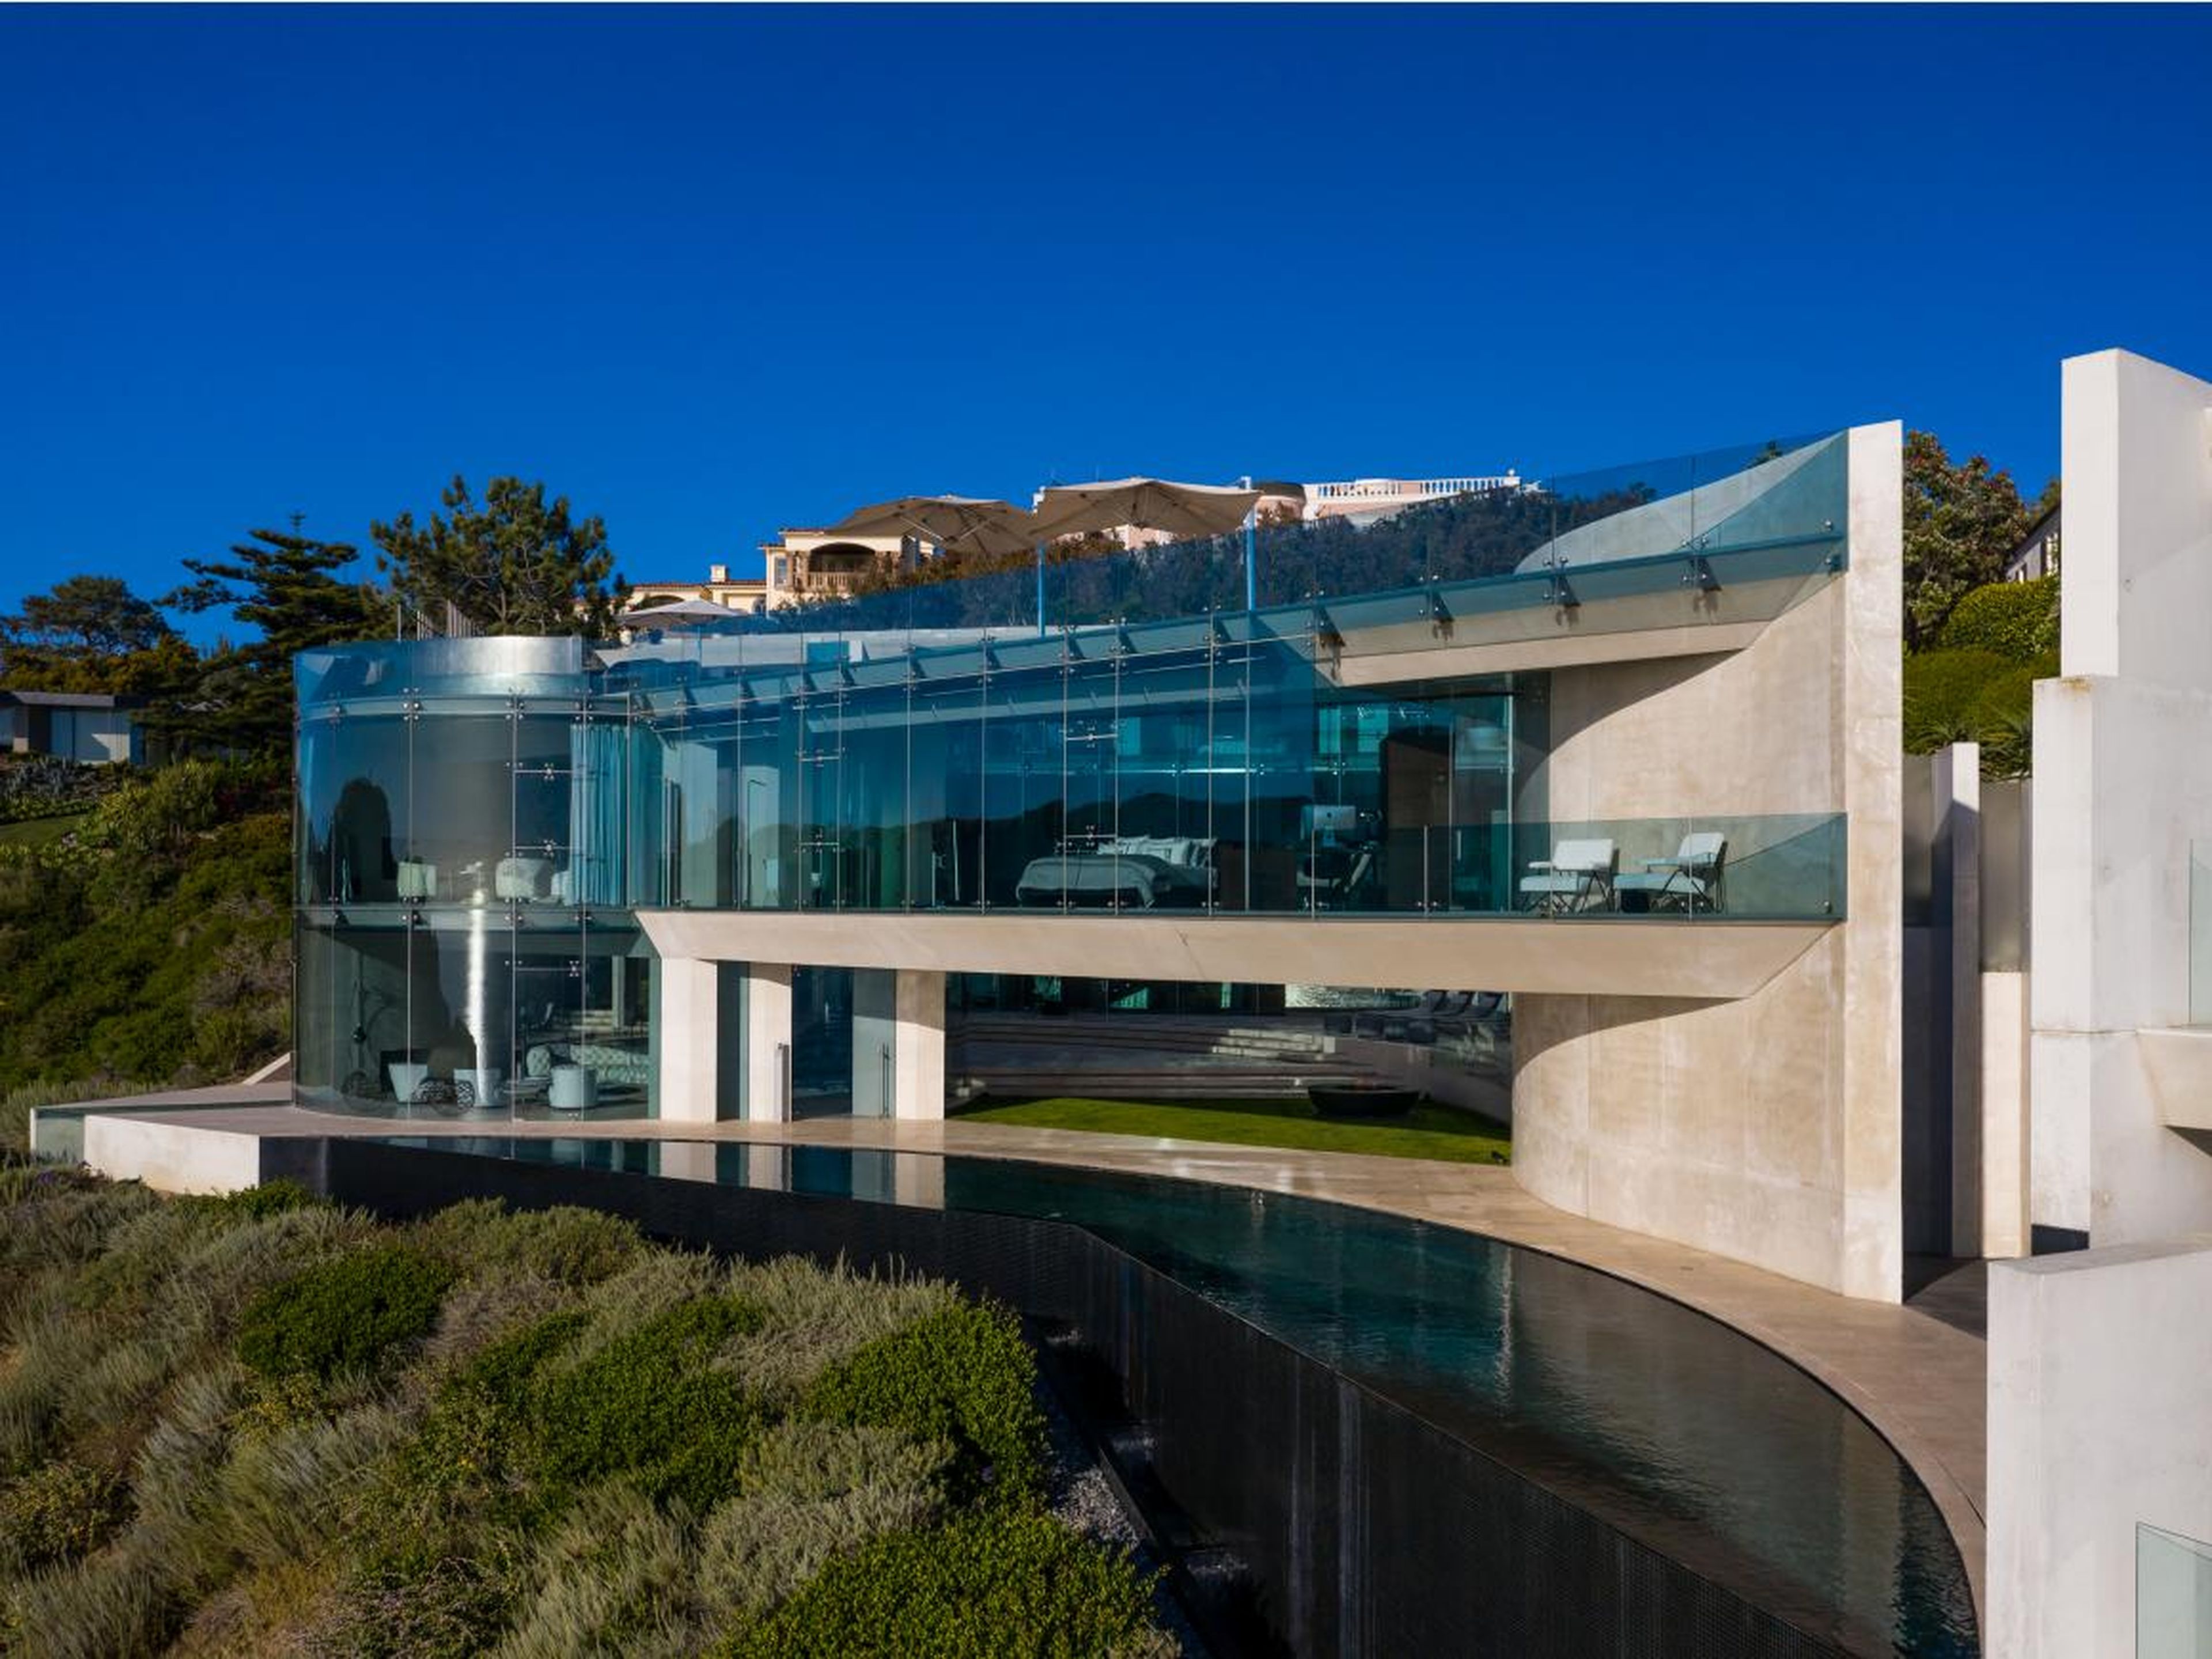 An ultra-modern clifftop California mansion just sold for $20.8 million, Douglas Elliman exclusively told Business Insider. The real-estate company did not initially disclose the buyer, but on September 6, the LA Times reported